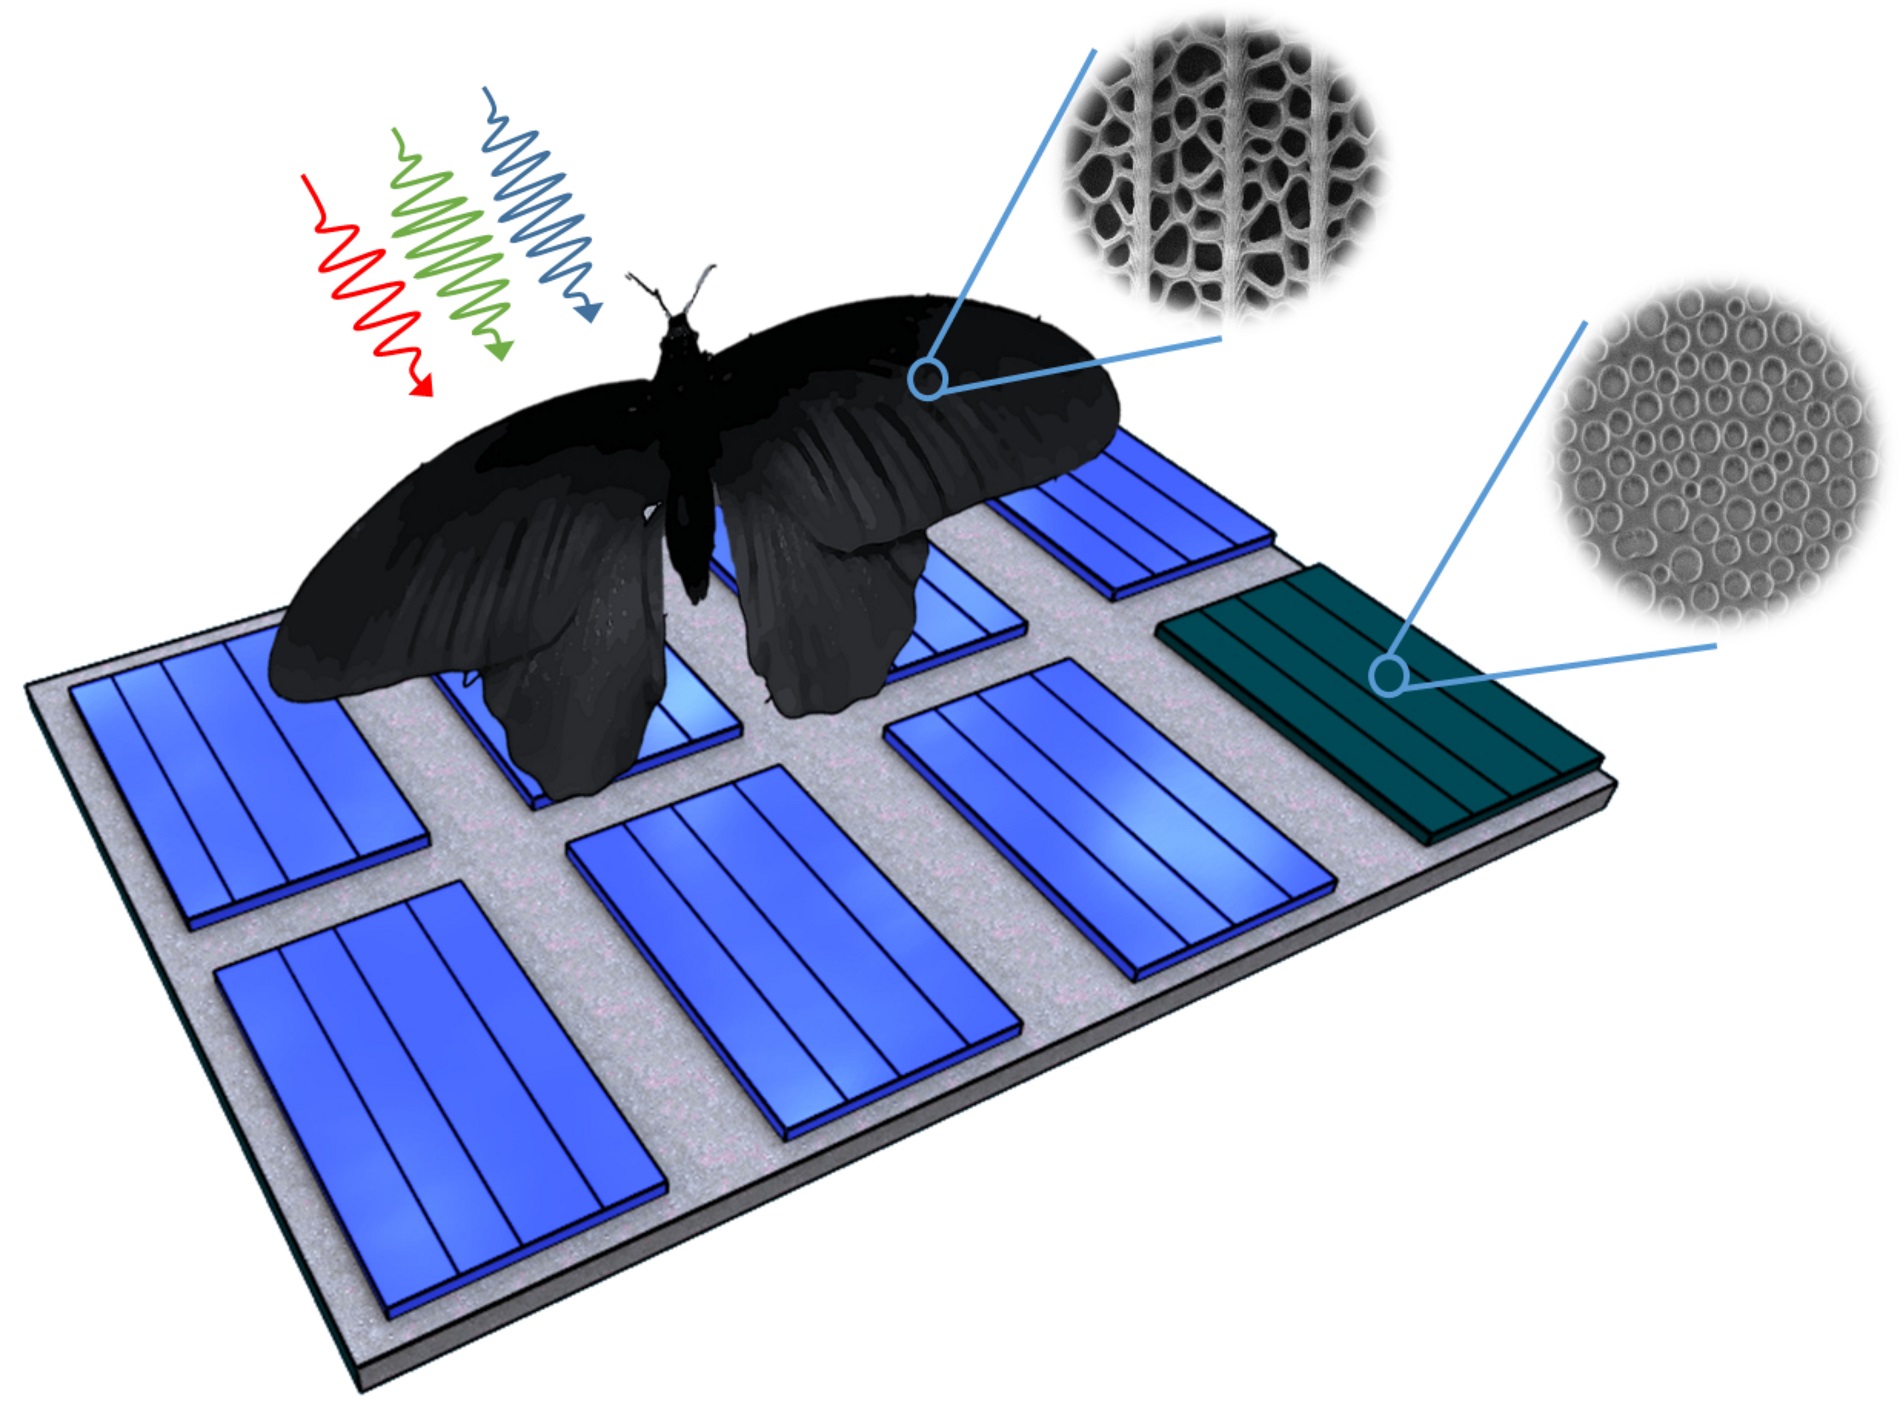 Nanostructures of the wing of Pachliopta aristolochiae can be transferred to solar cells and enhance their absorption rates by up to 200 percent